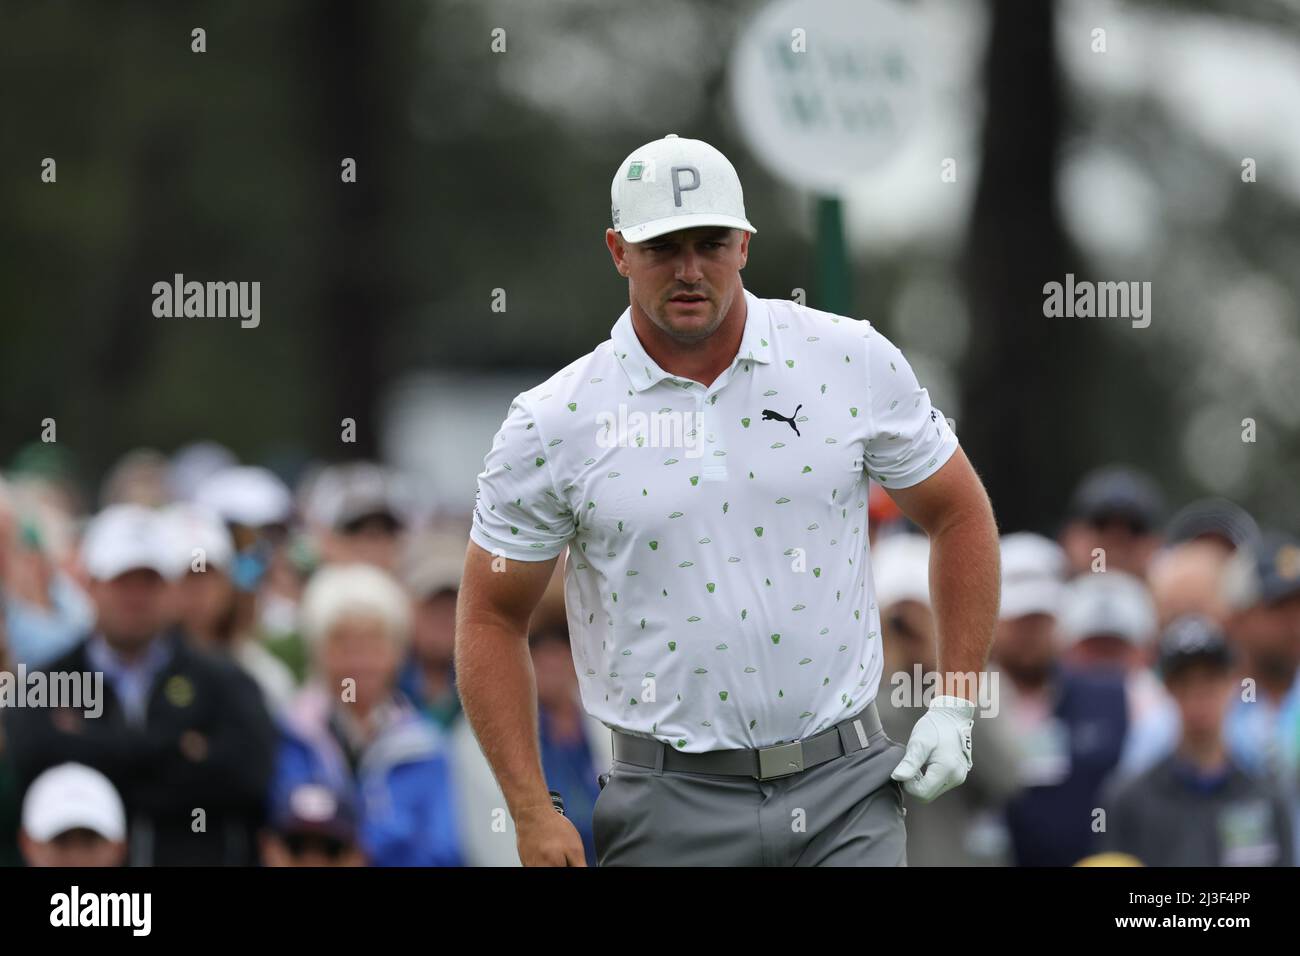 United States Bryson DeChambeau during the first round of the 2022 Masters golf tournament at the Augusta National Golf Club in Augusta, Georgia, United States, on April 7, 2022